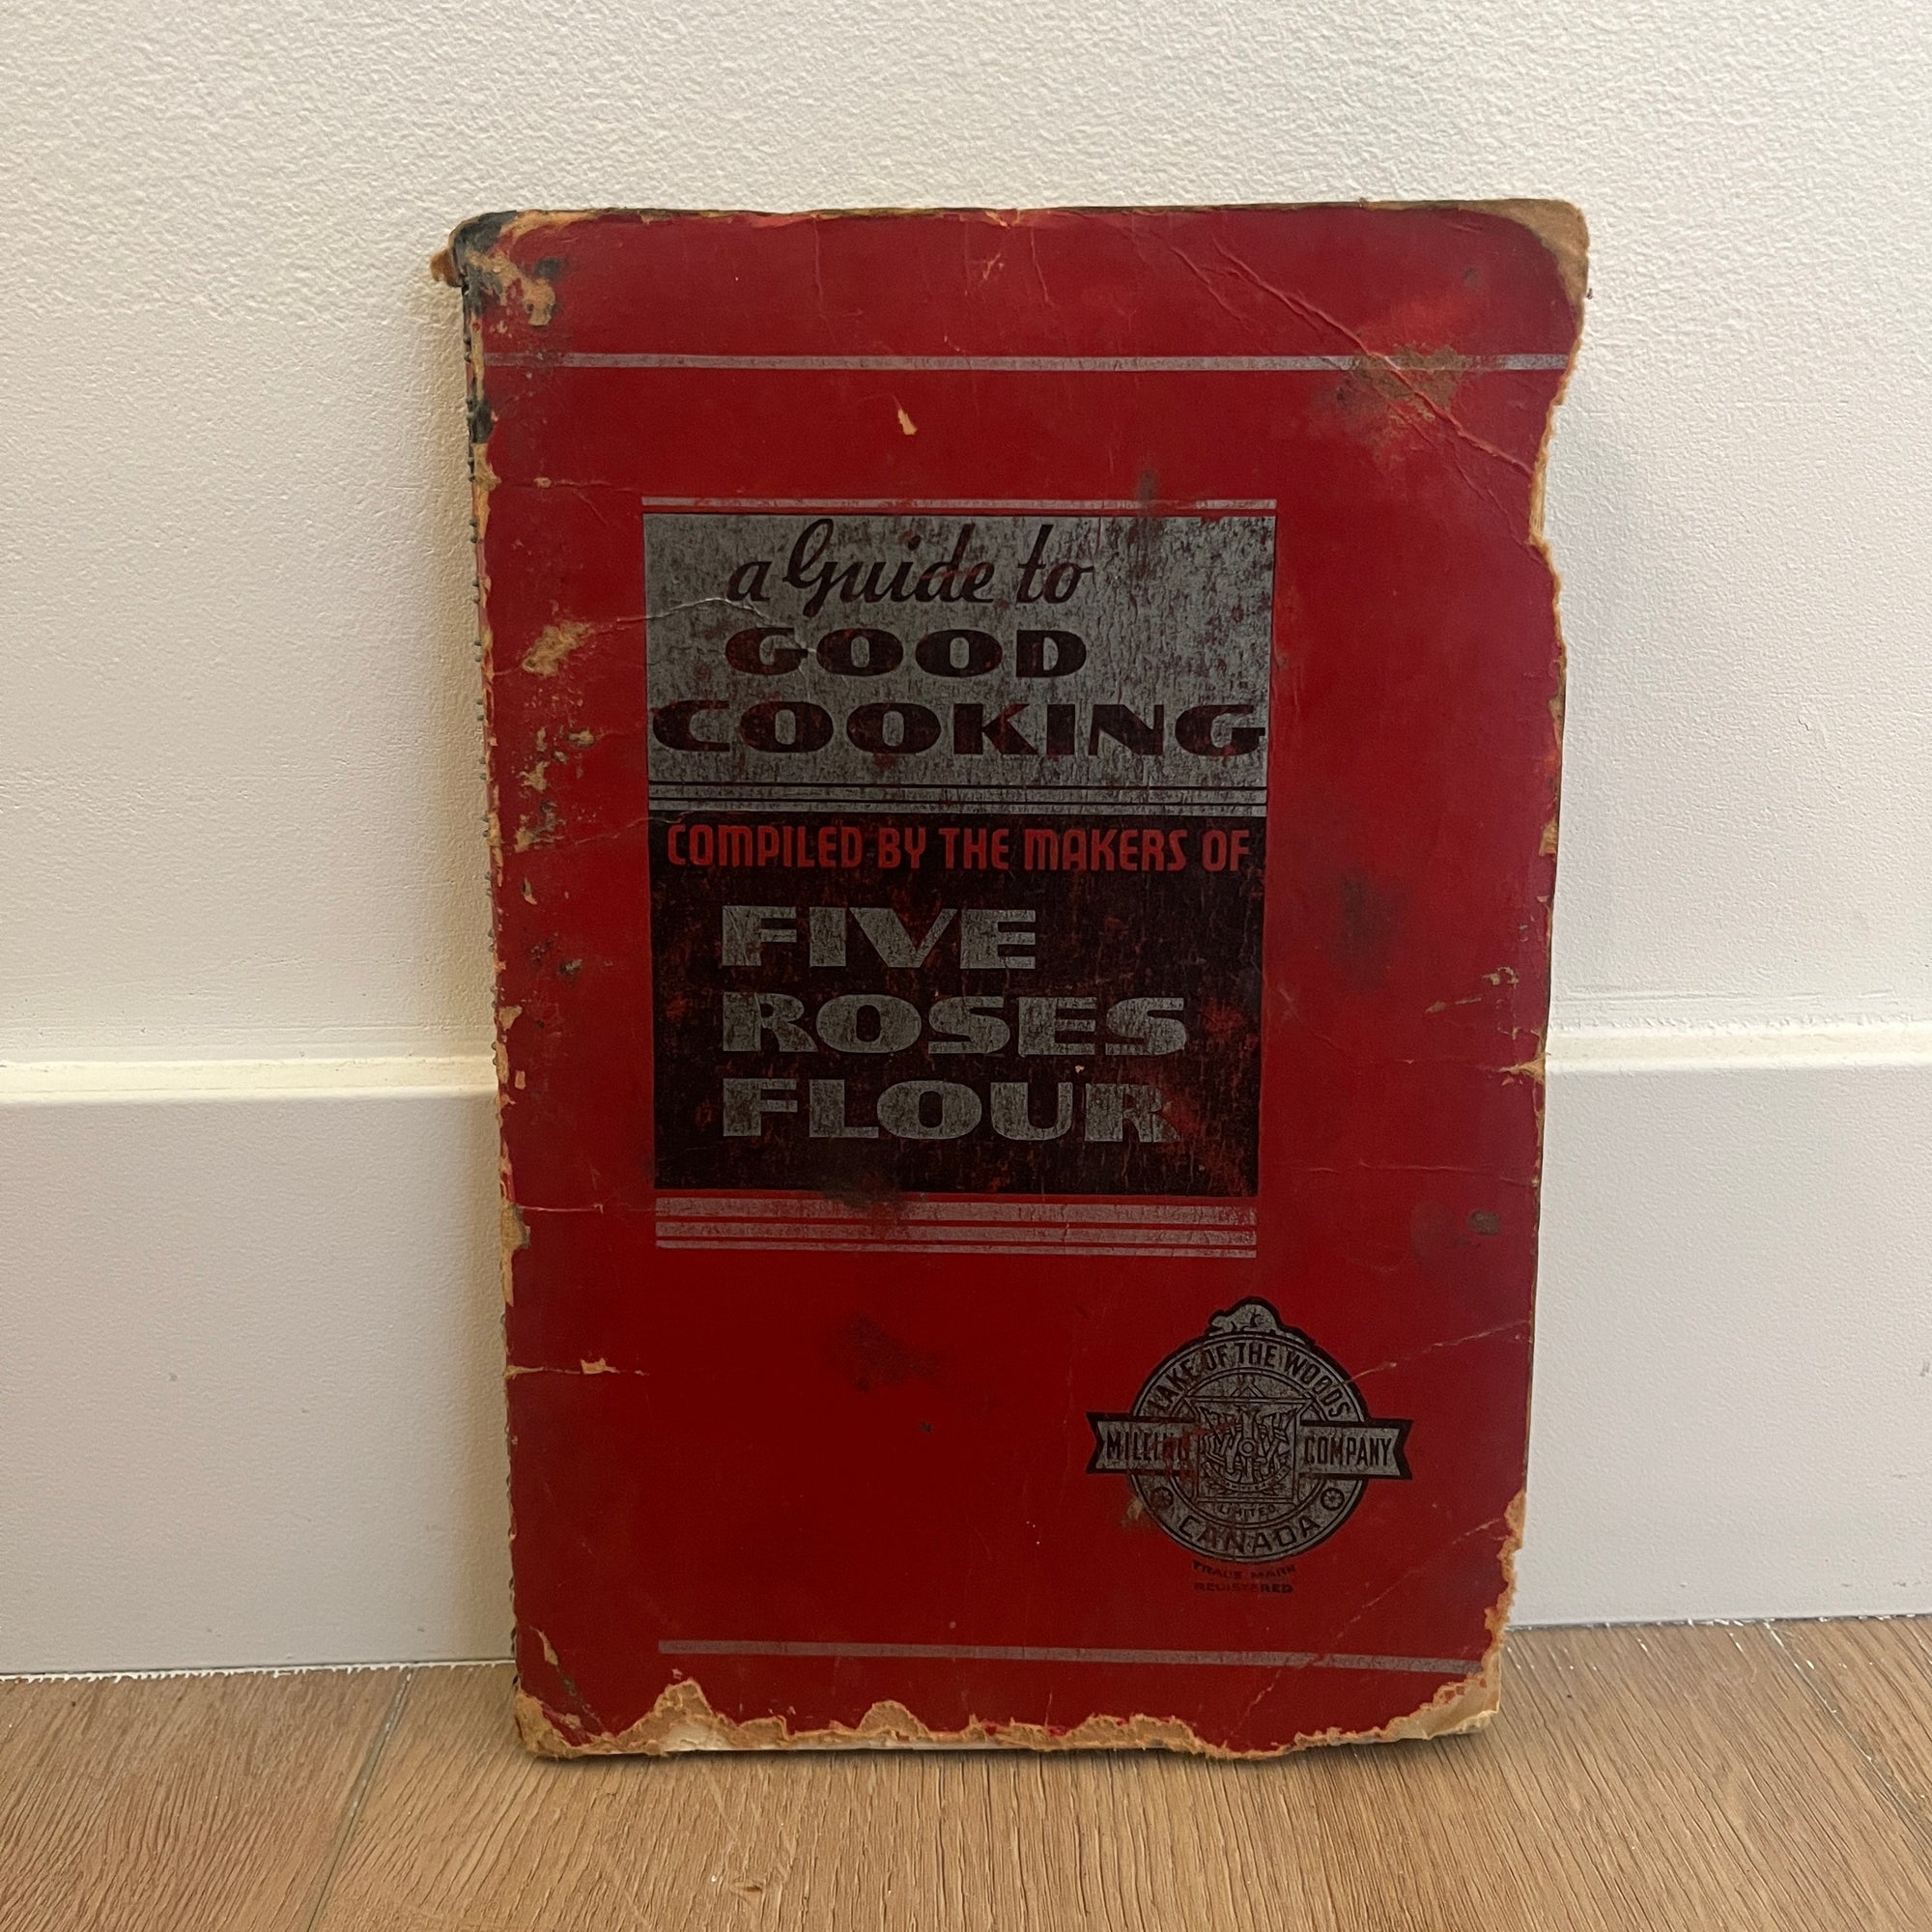 1938 ‘Guide To Good Cooking’ Cook Book - Five Roses Flour Co.